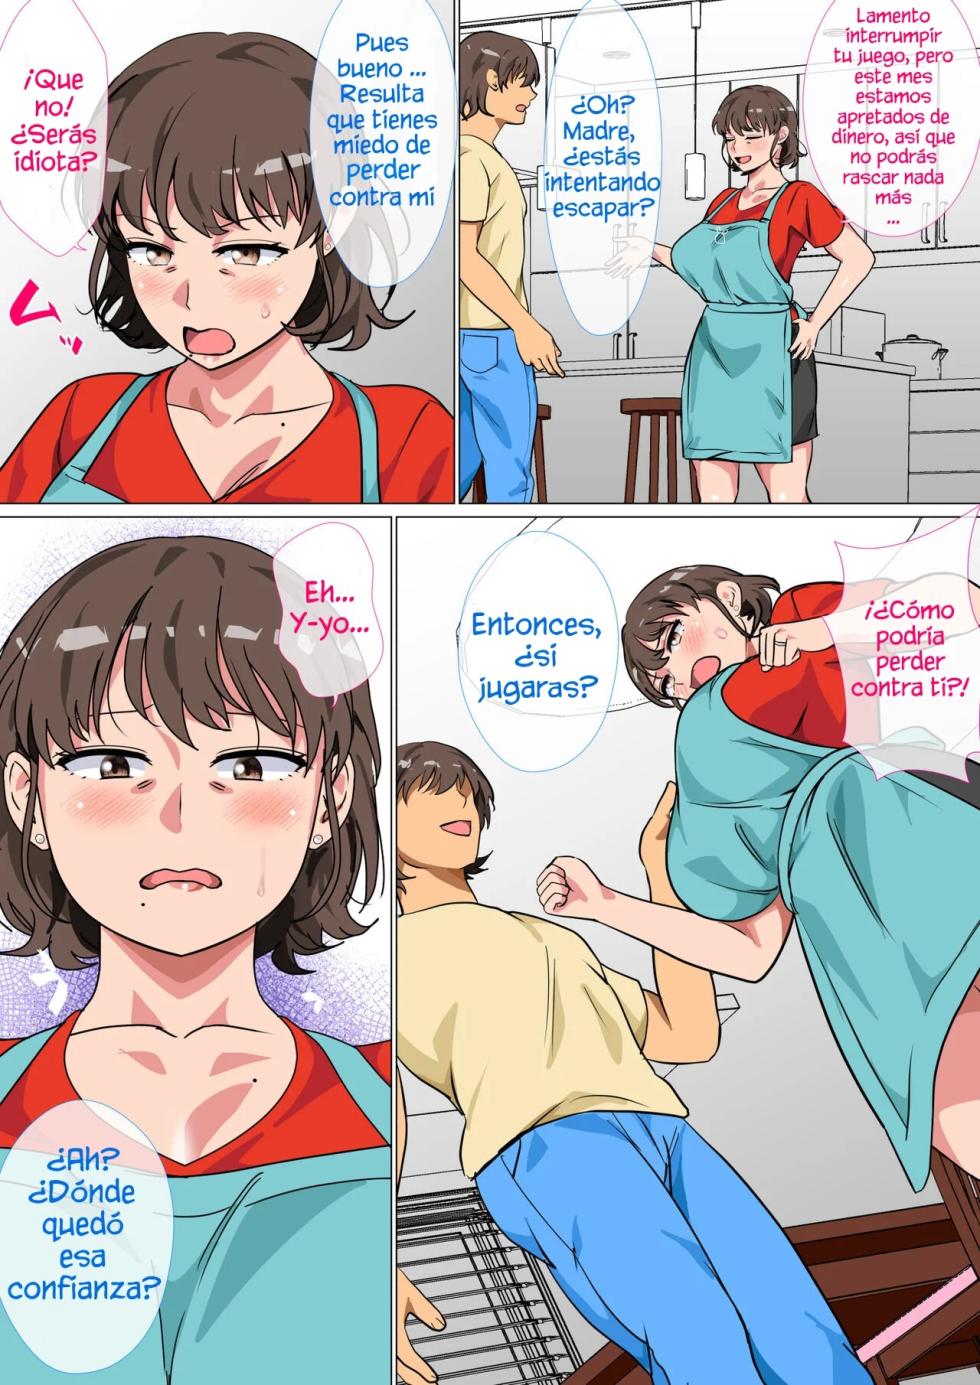 [Circle Spice] Ousama Game no Meirei de Haha to Sex Shita Hanashi | I Ordered My Mom to Have Sex with Me in King's Game [Spanish][PlipPlop] - Page 6